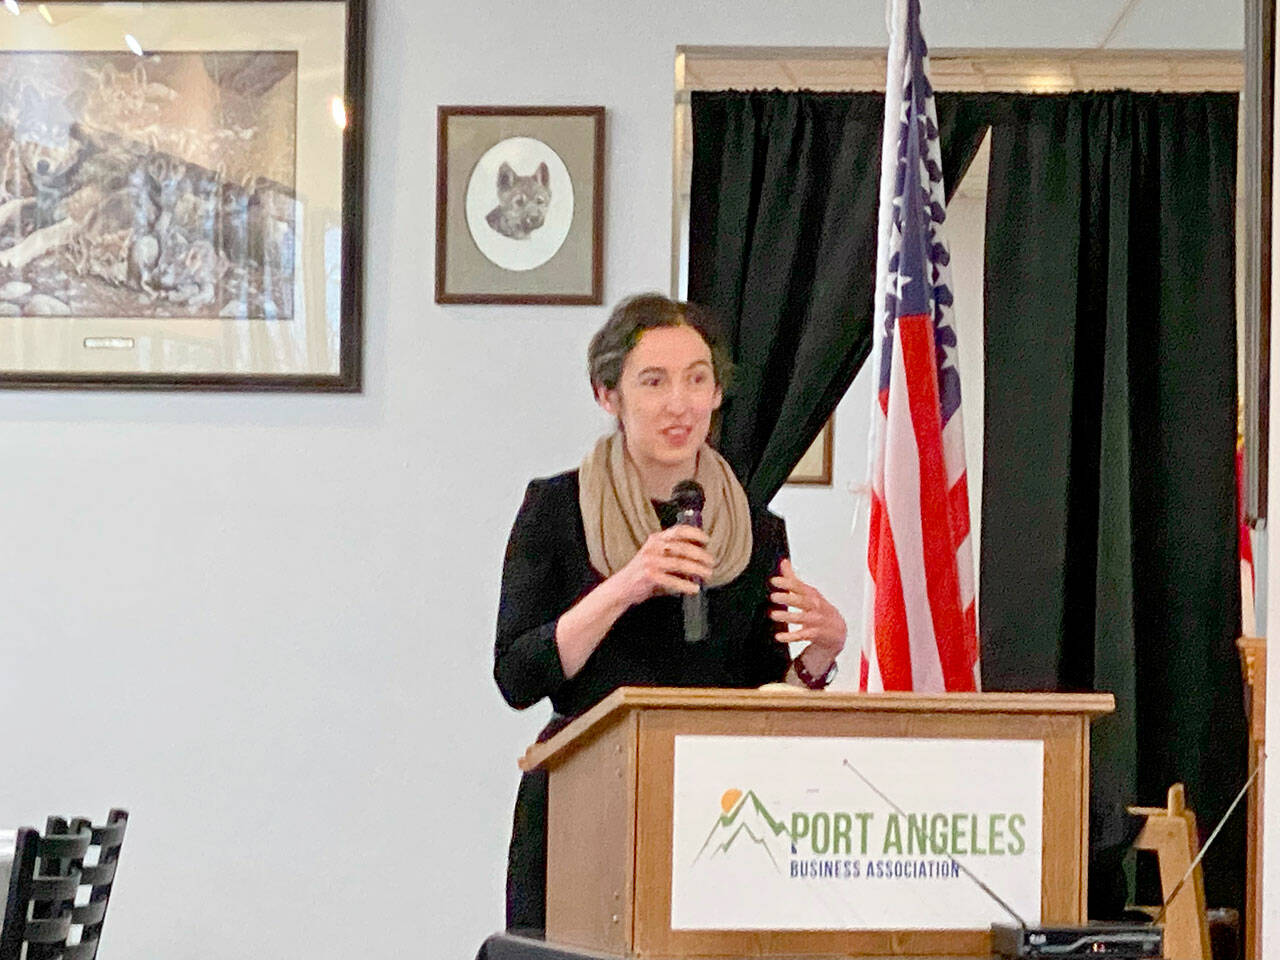 Dr. Allison Berry speaks Tuesday morning during the Port Angeles Business Association meeting. (Ken Park/Peninsula Daily News)